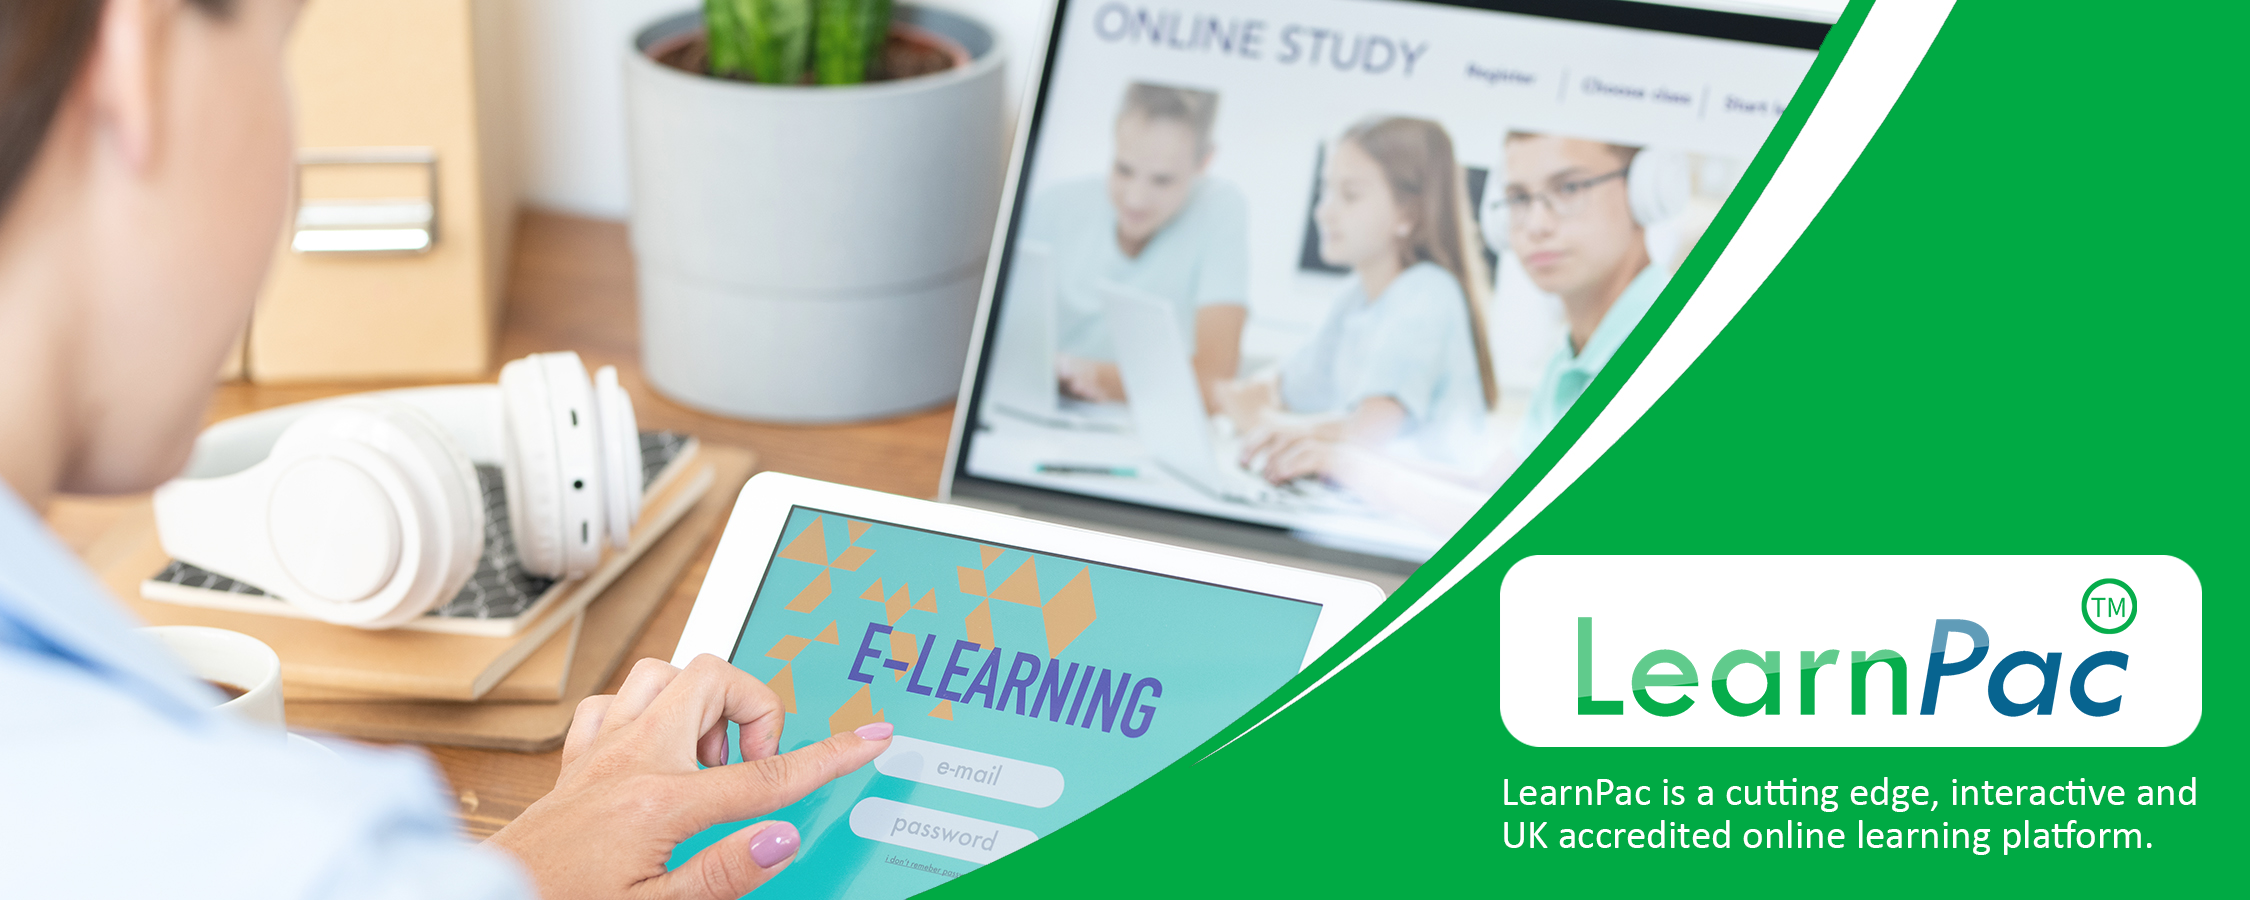 Managing Absence - Online Learning Courses - E-Learning Courses - LearnPac Systems UK --